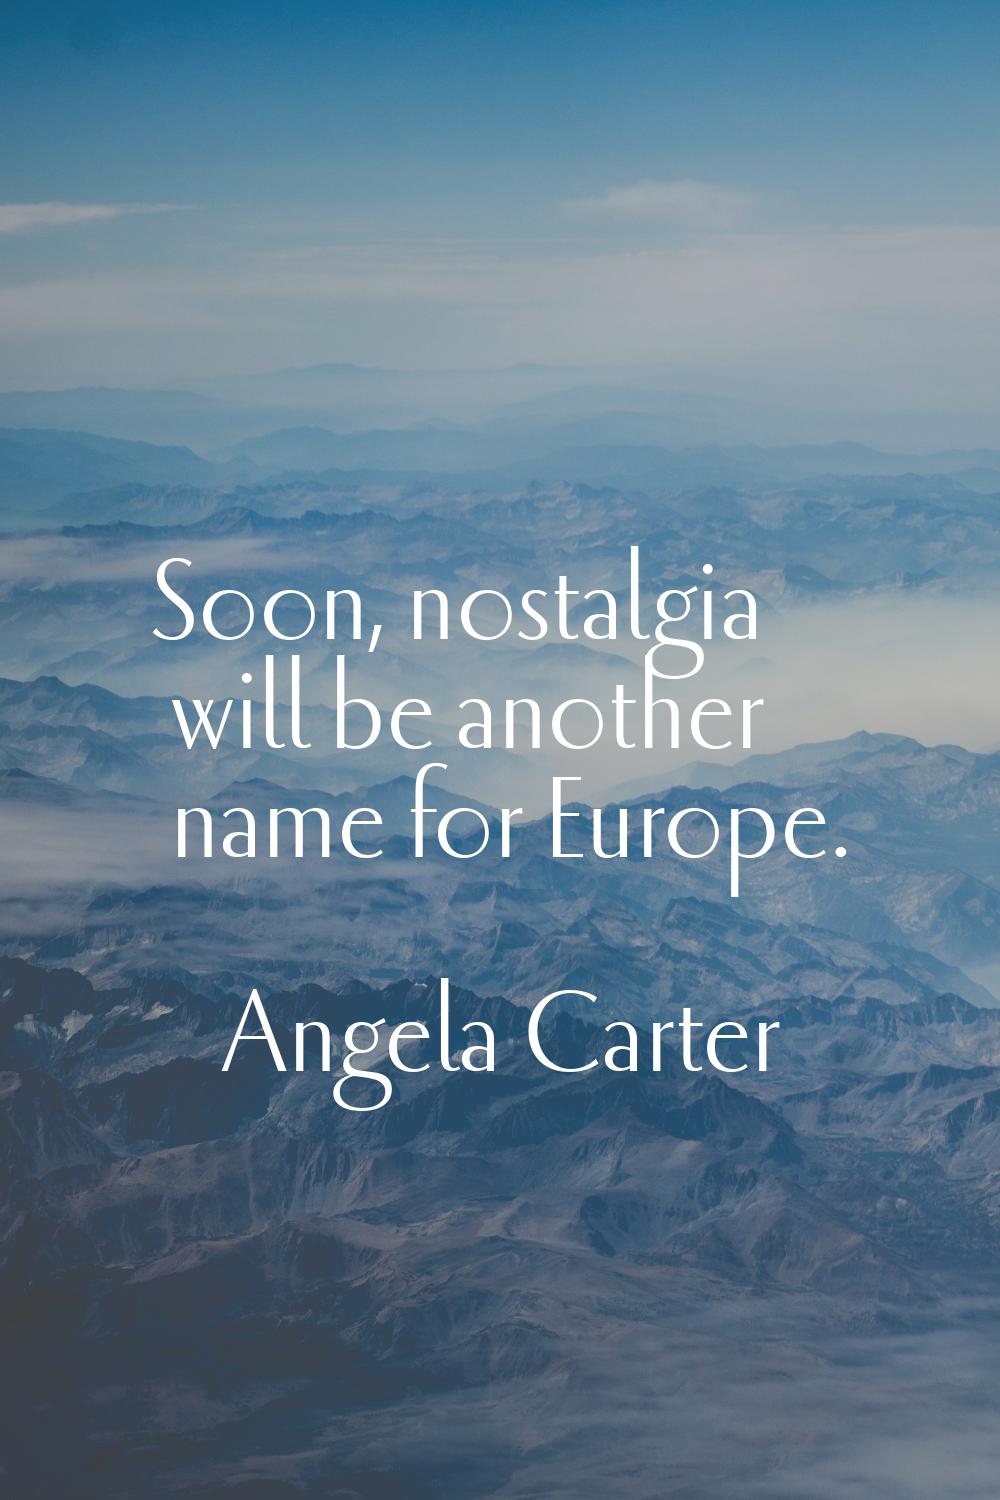 Soon, nostalgia will be another name for Europe.